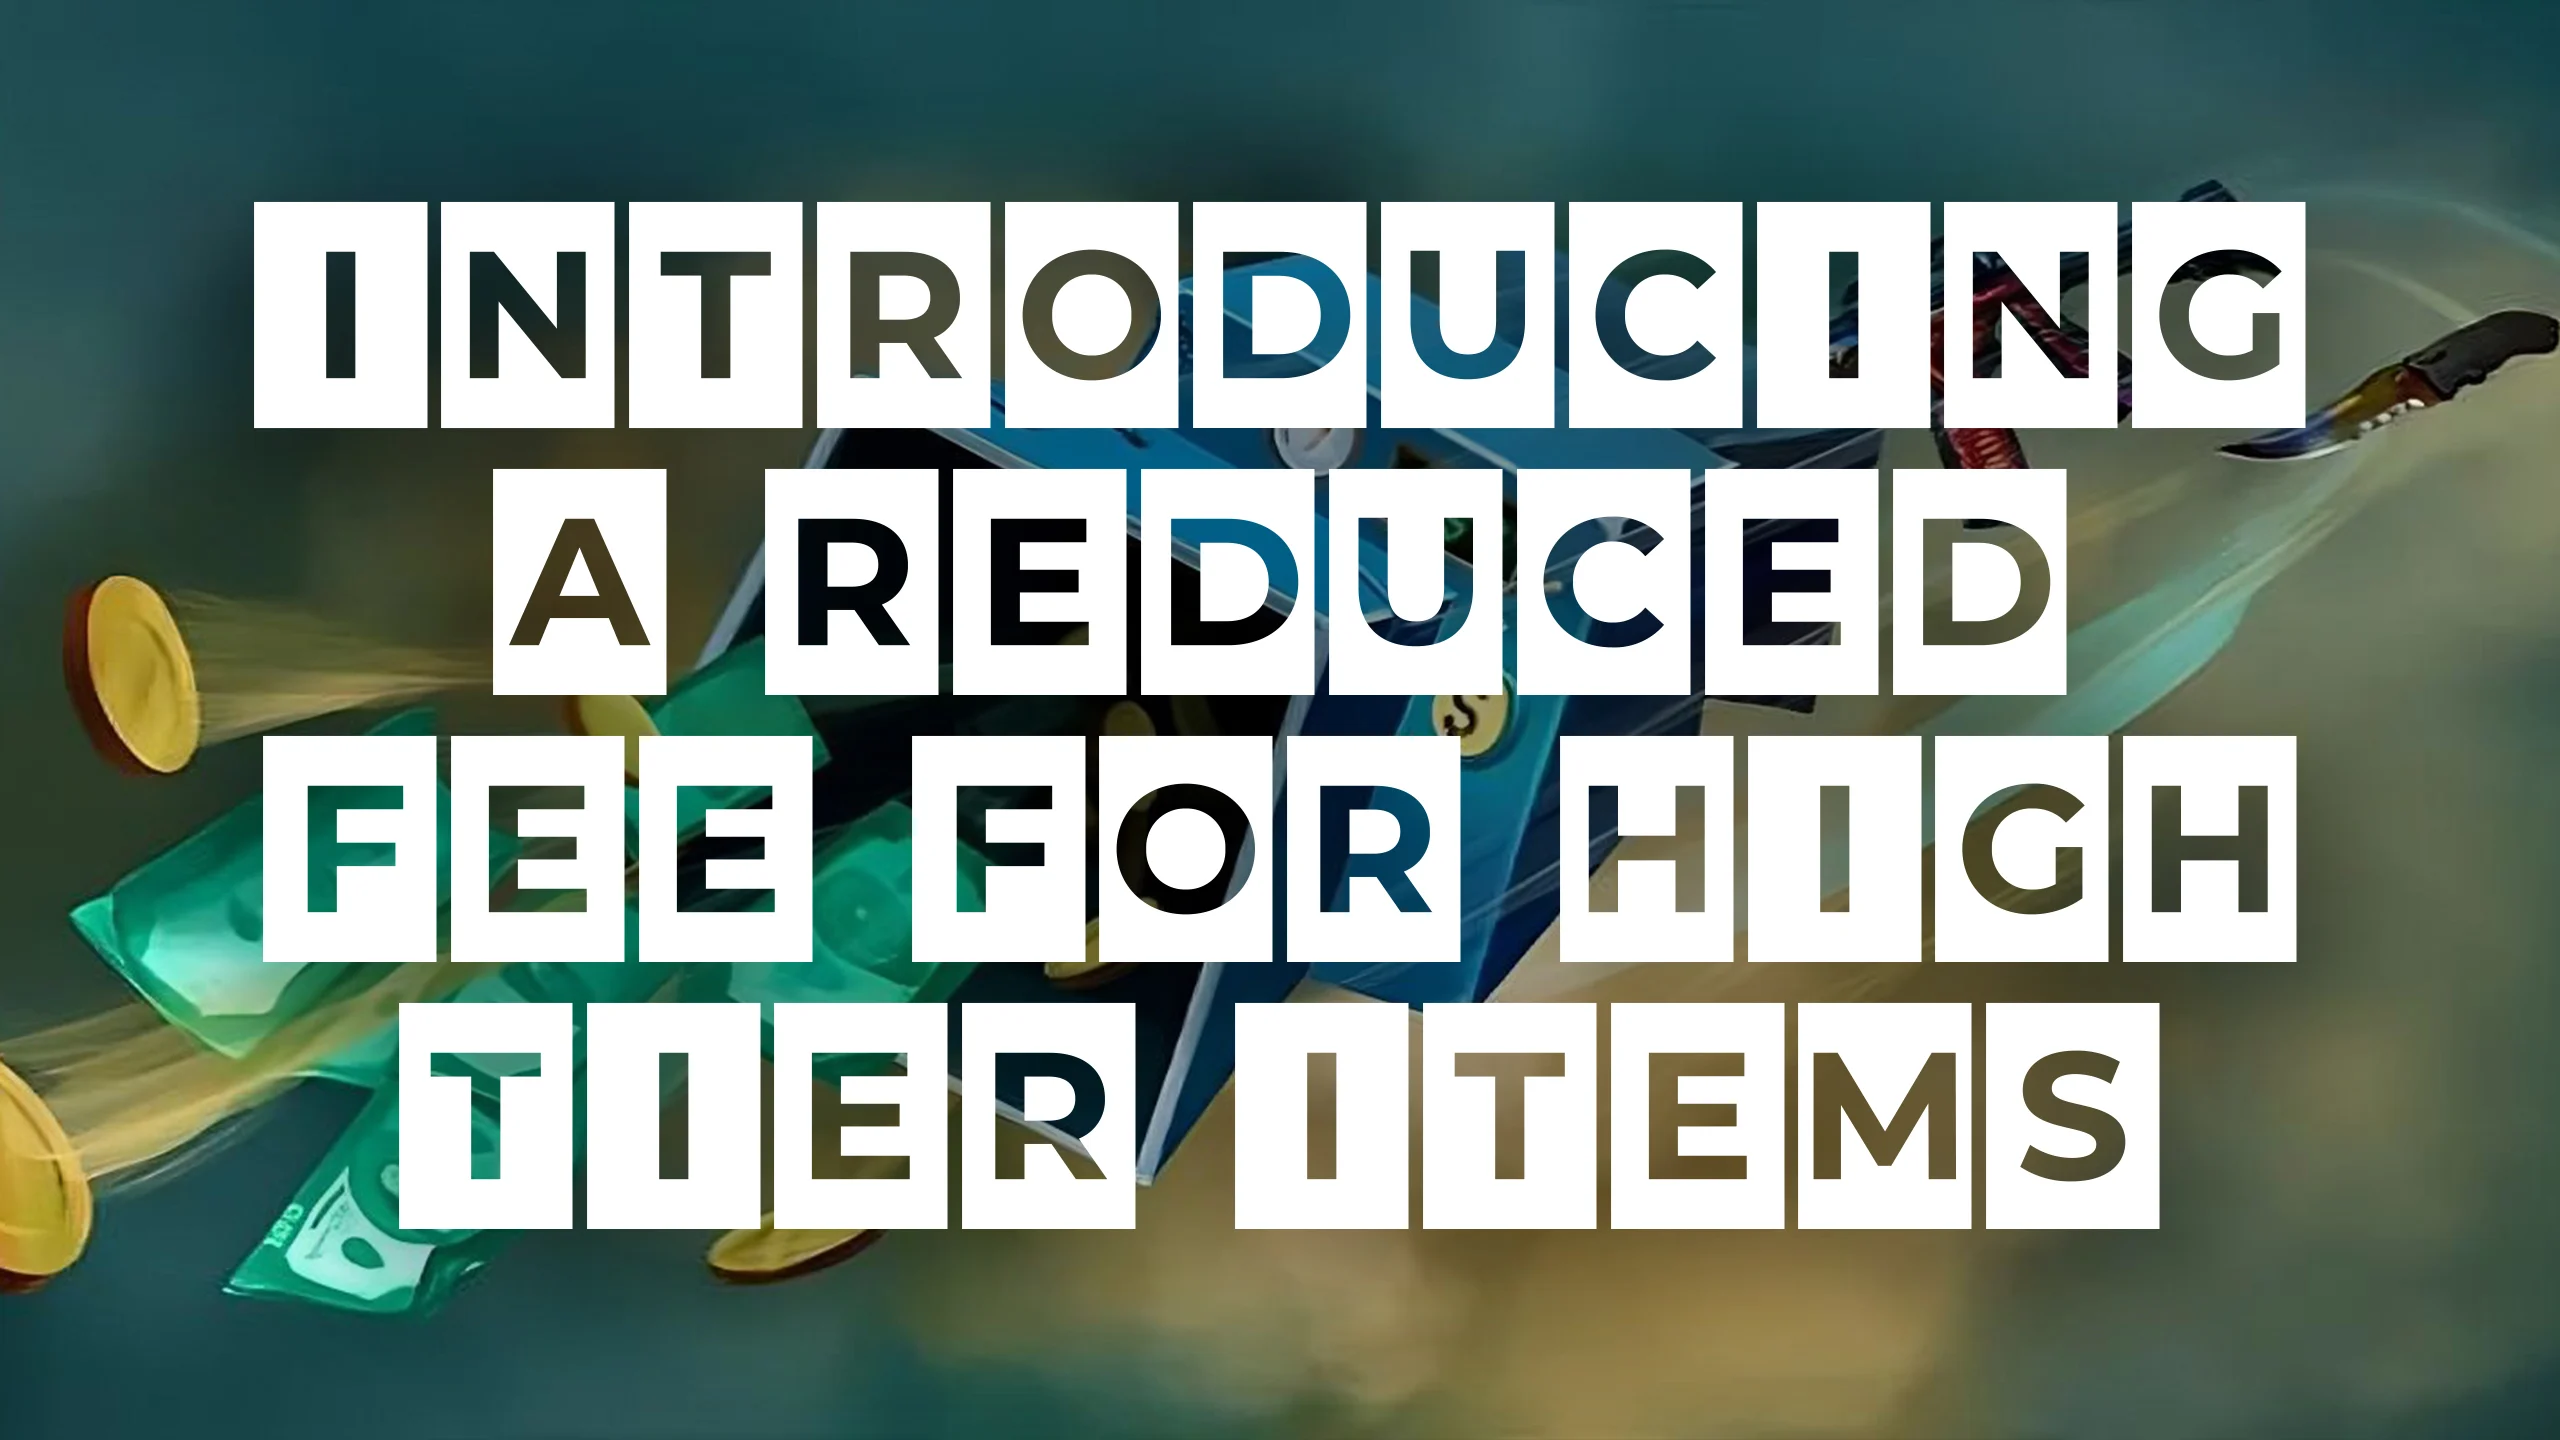 Introducing a Reduced Fee for High Tier Items